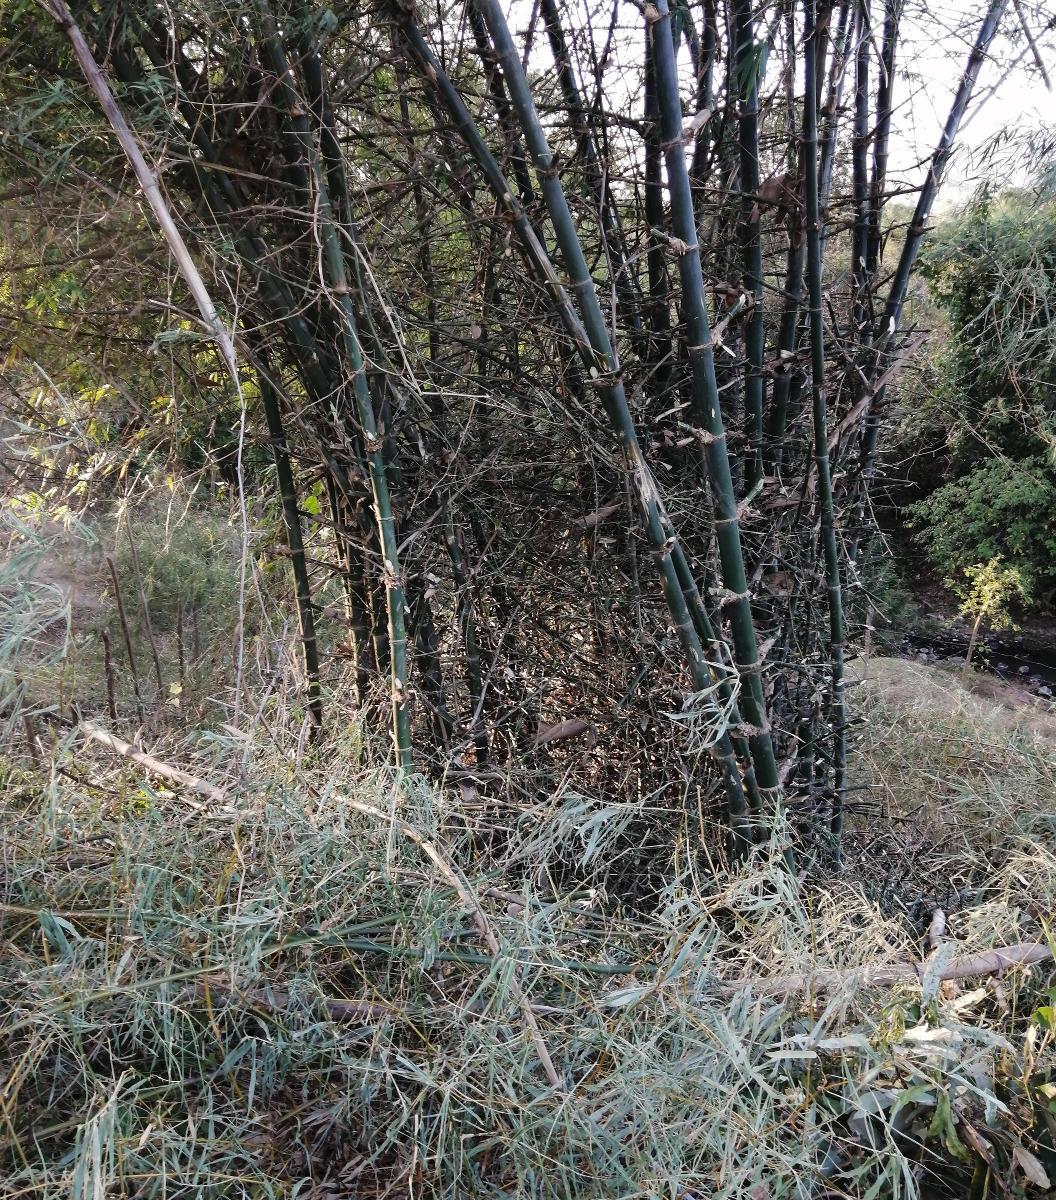 The bamboo clump growing on our farm.